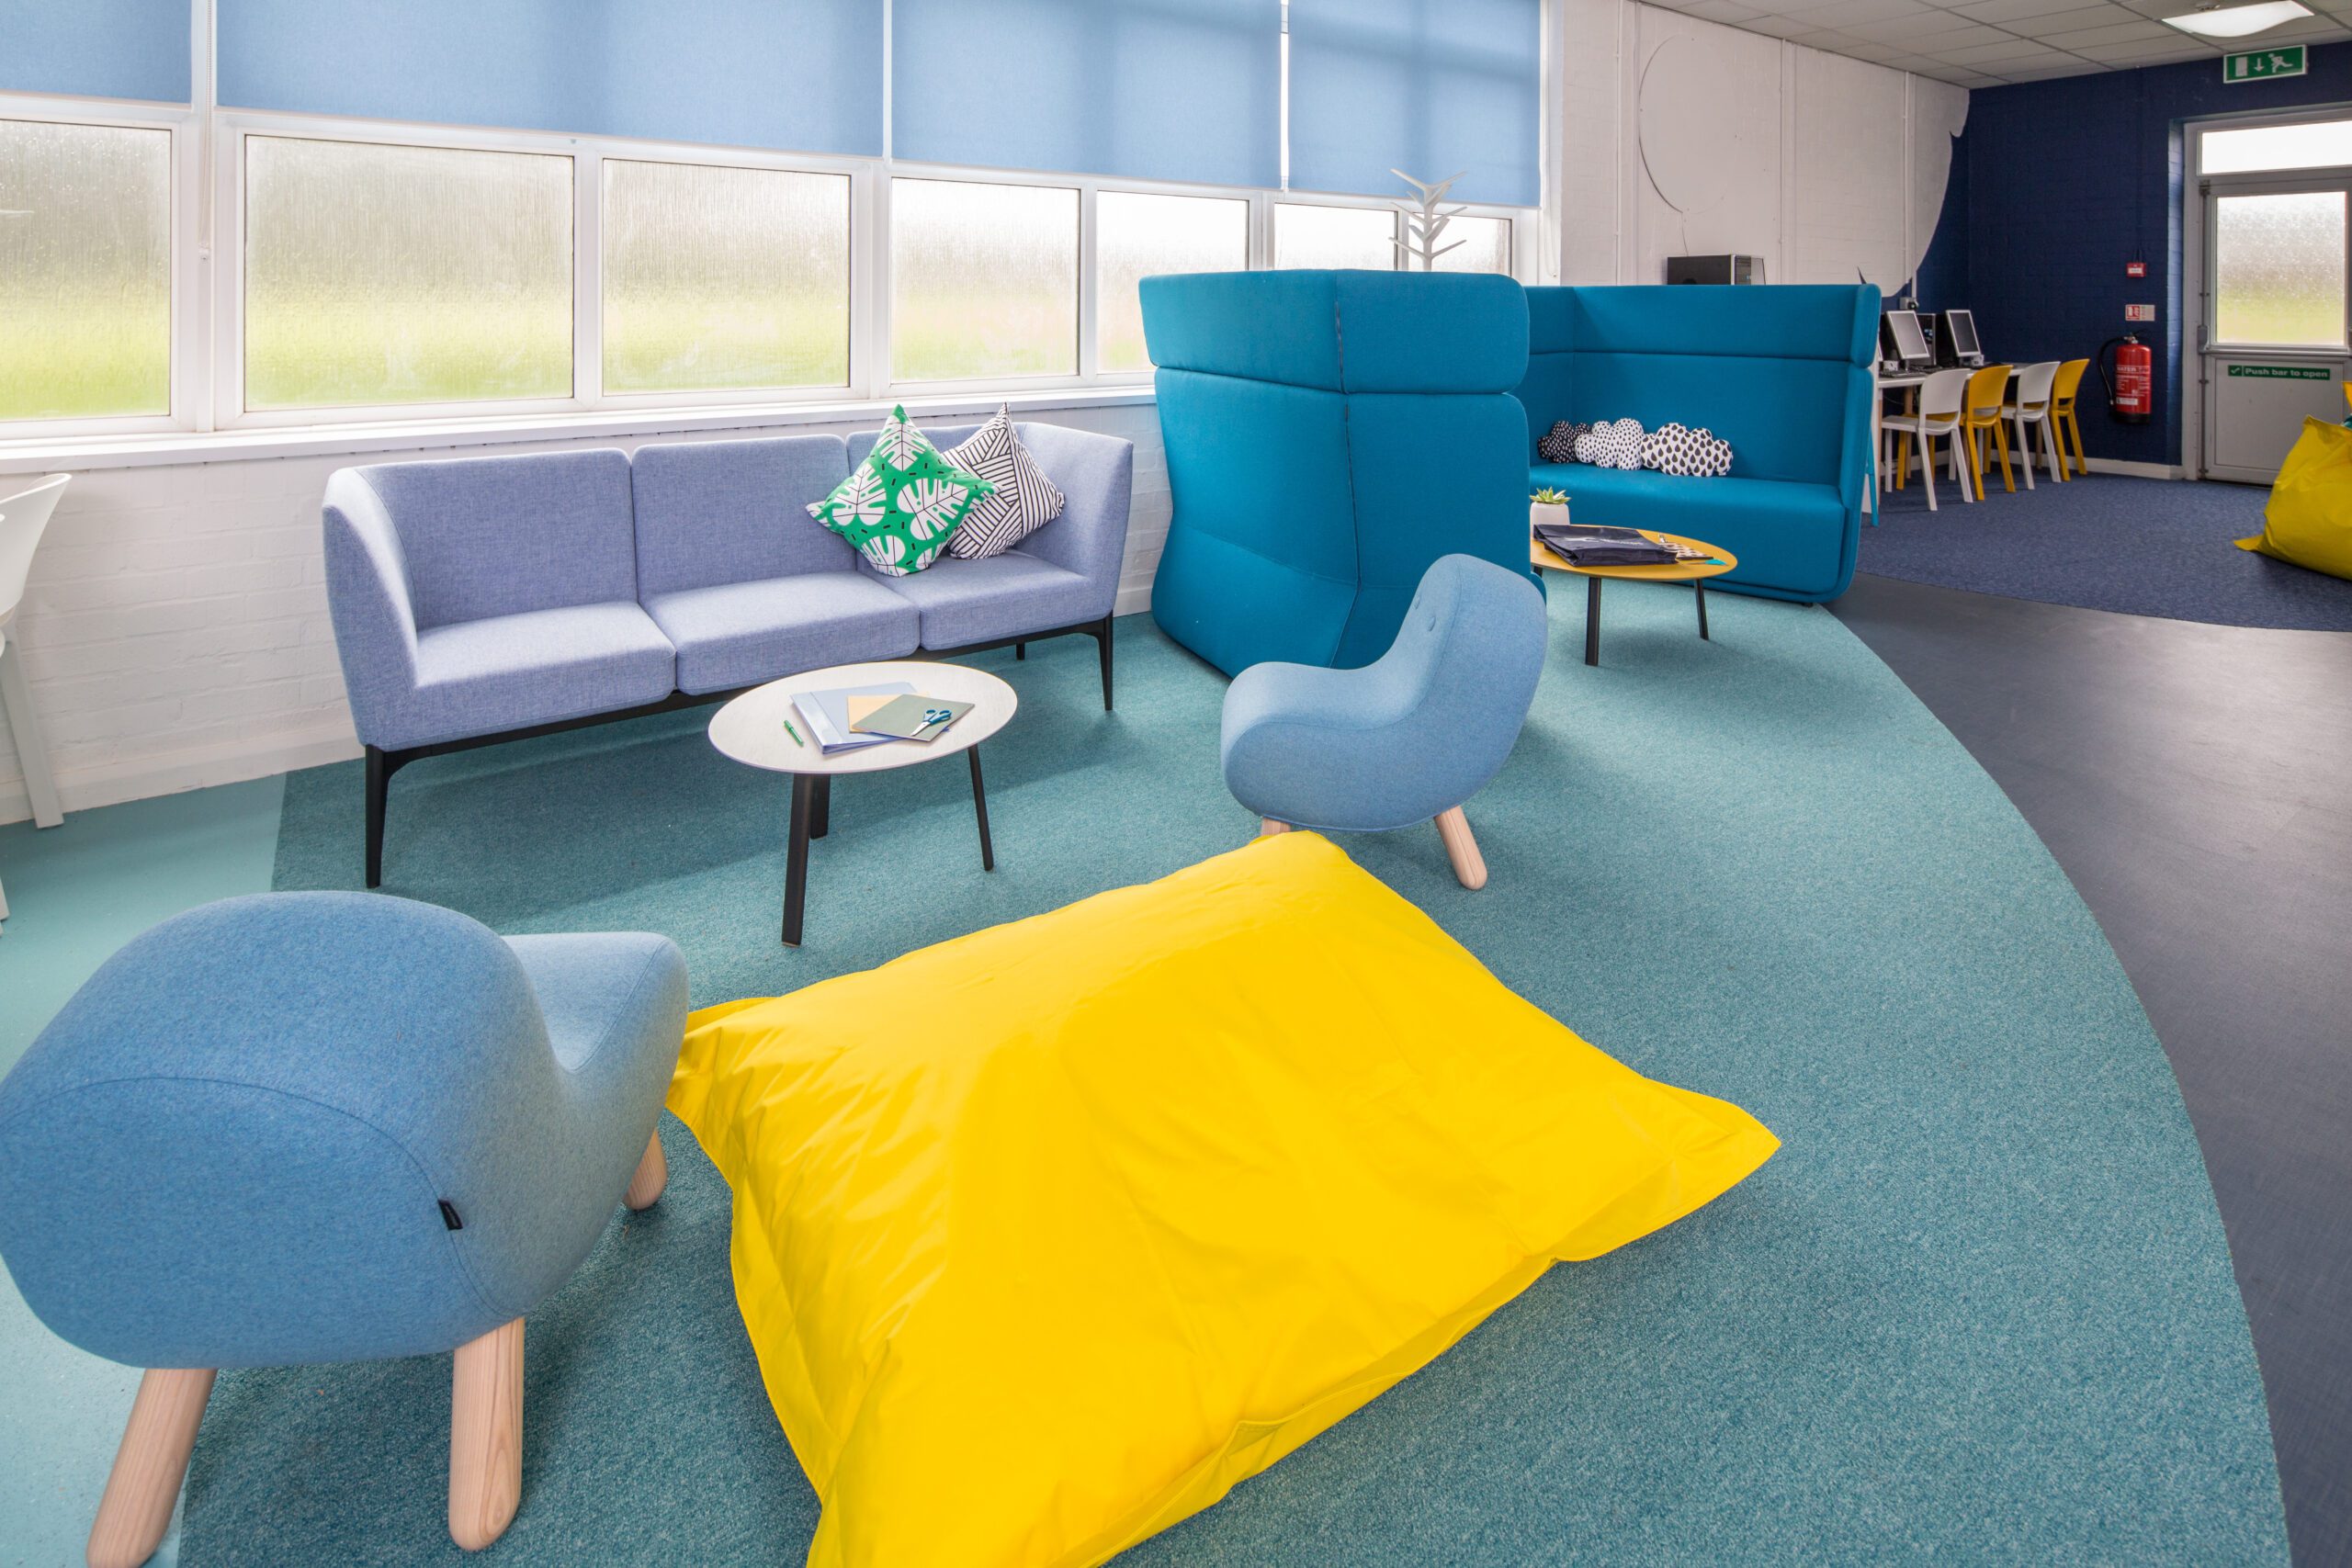 Willows Learning lounge_C9C9810